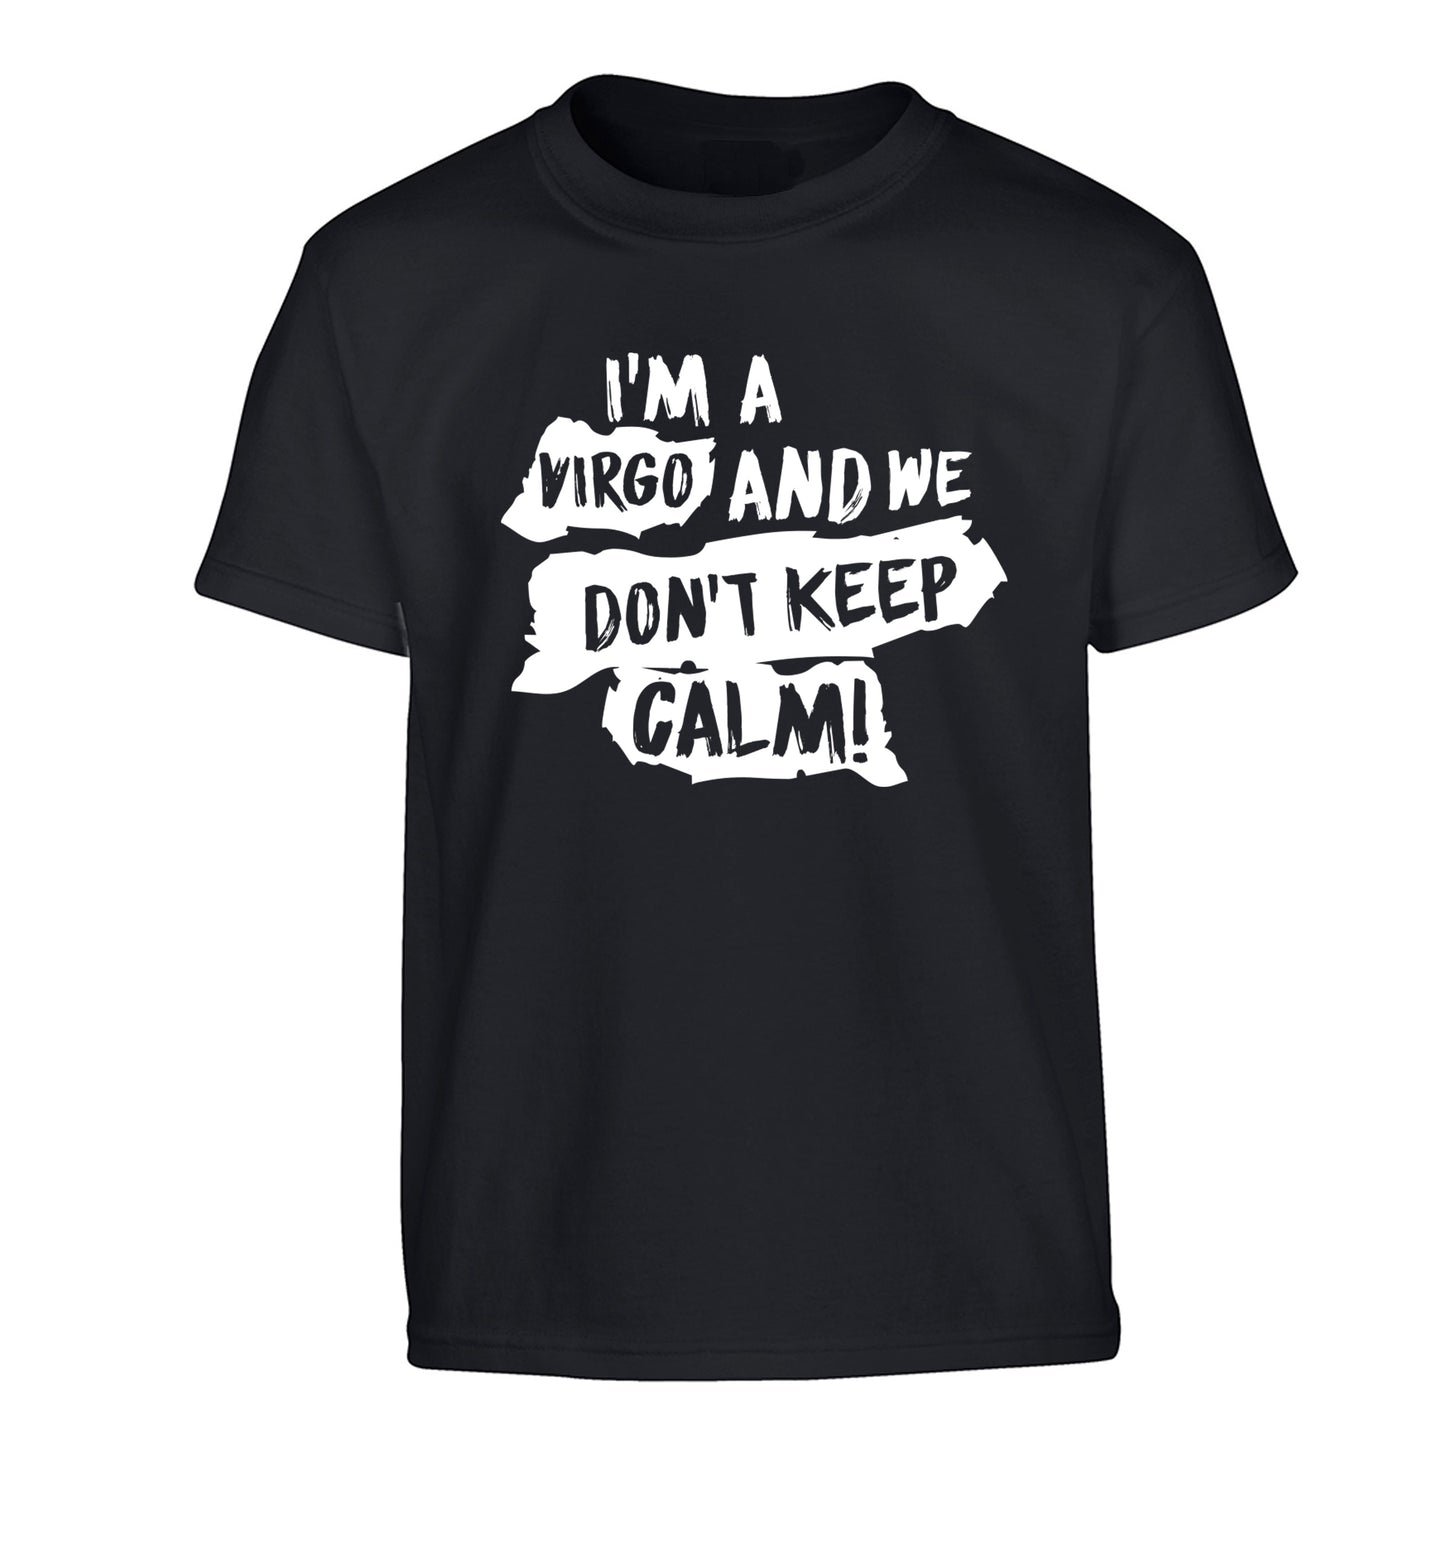 I'm a virgo and we don't keep calm Children's black Tshirt 12-13 Years